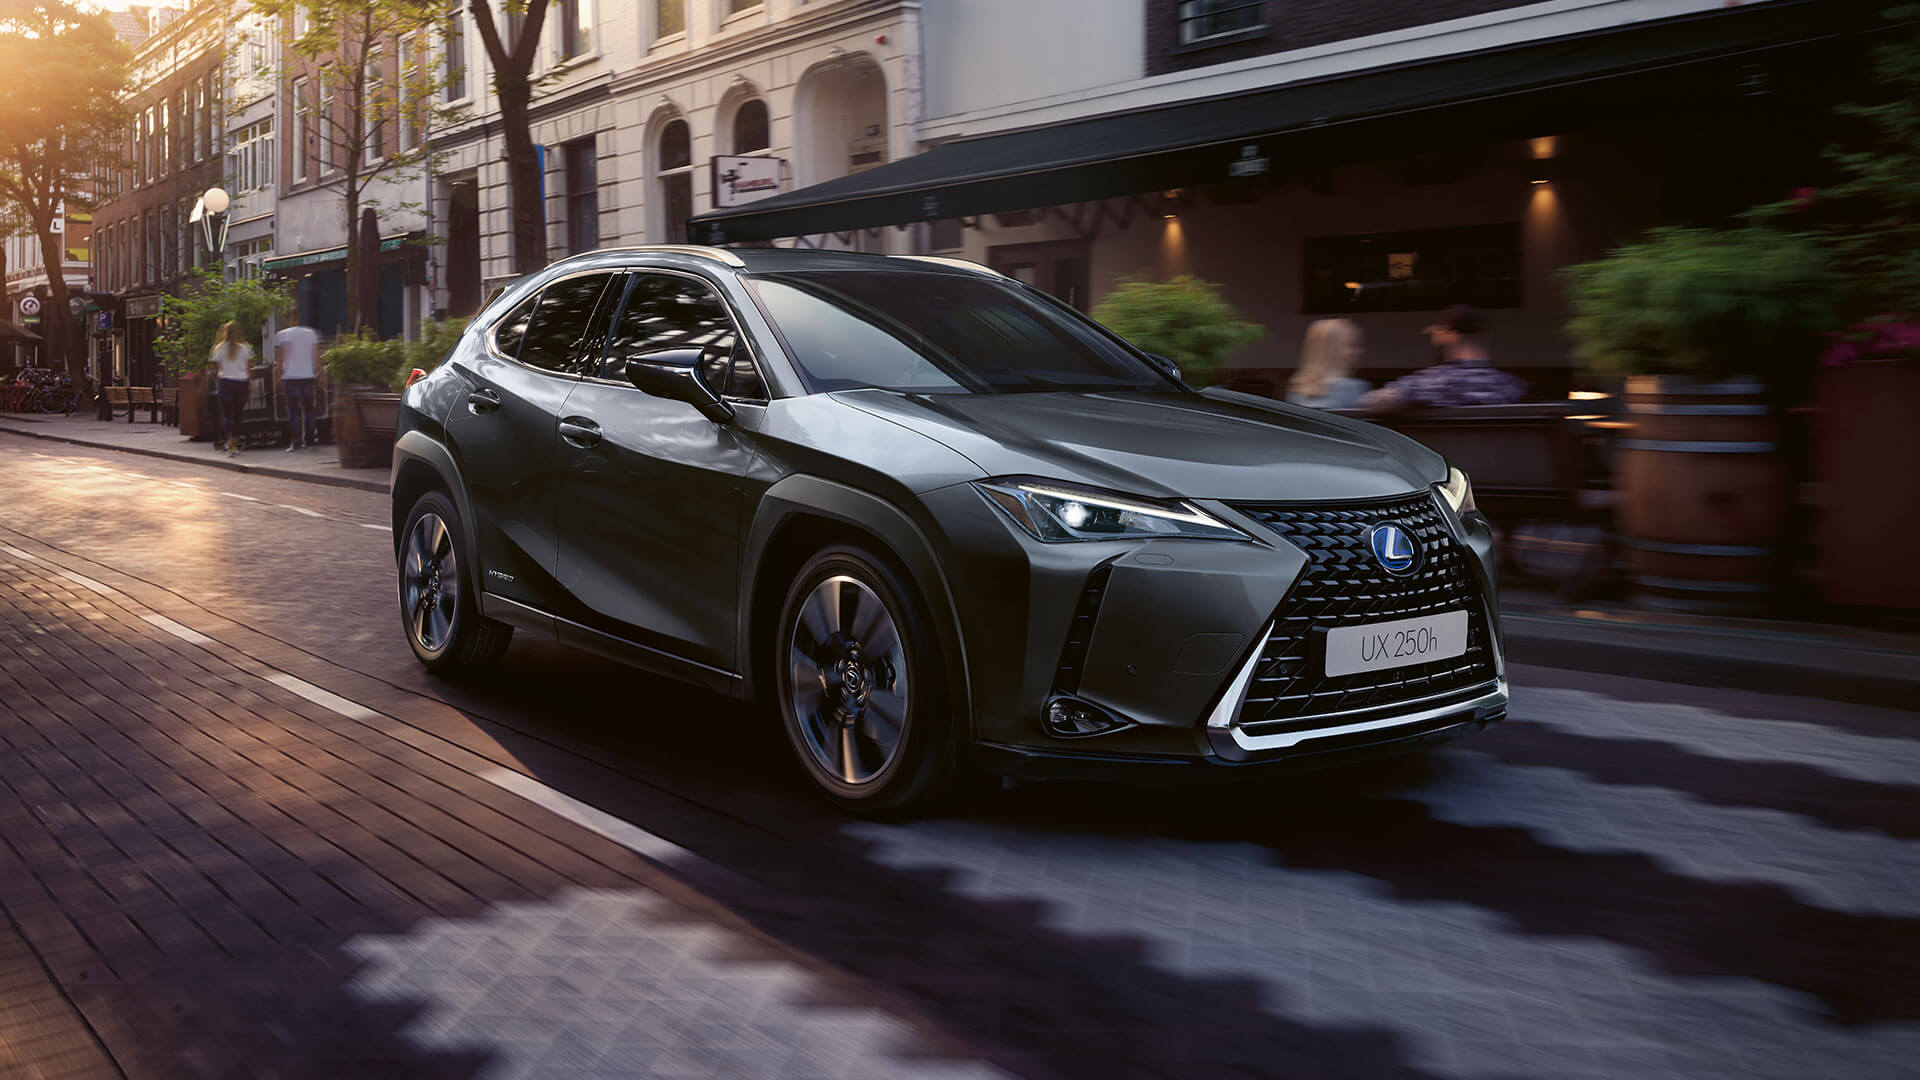 Lexus UX 250h driving in a town location 